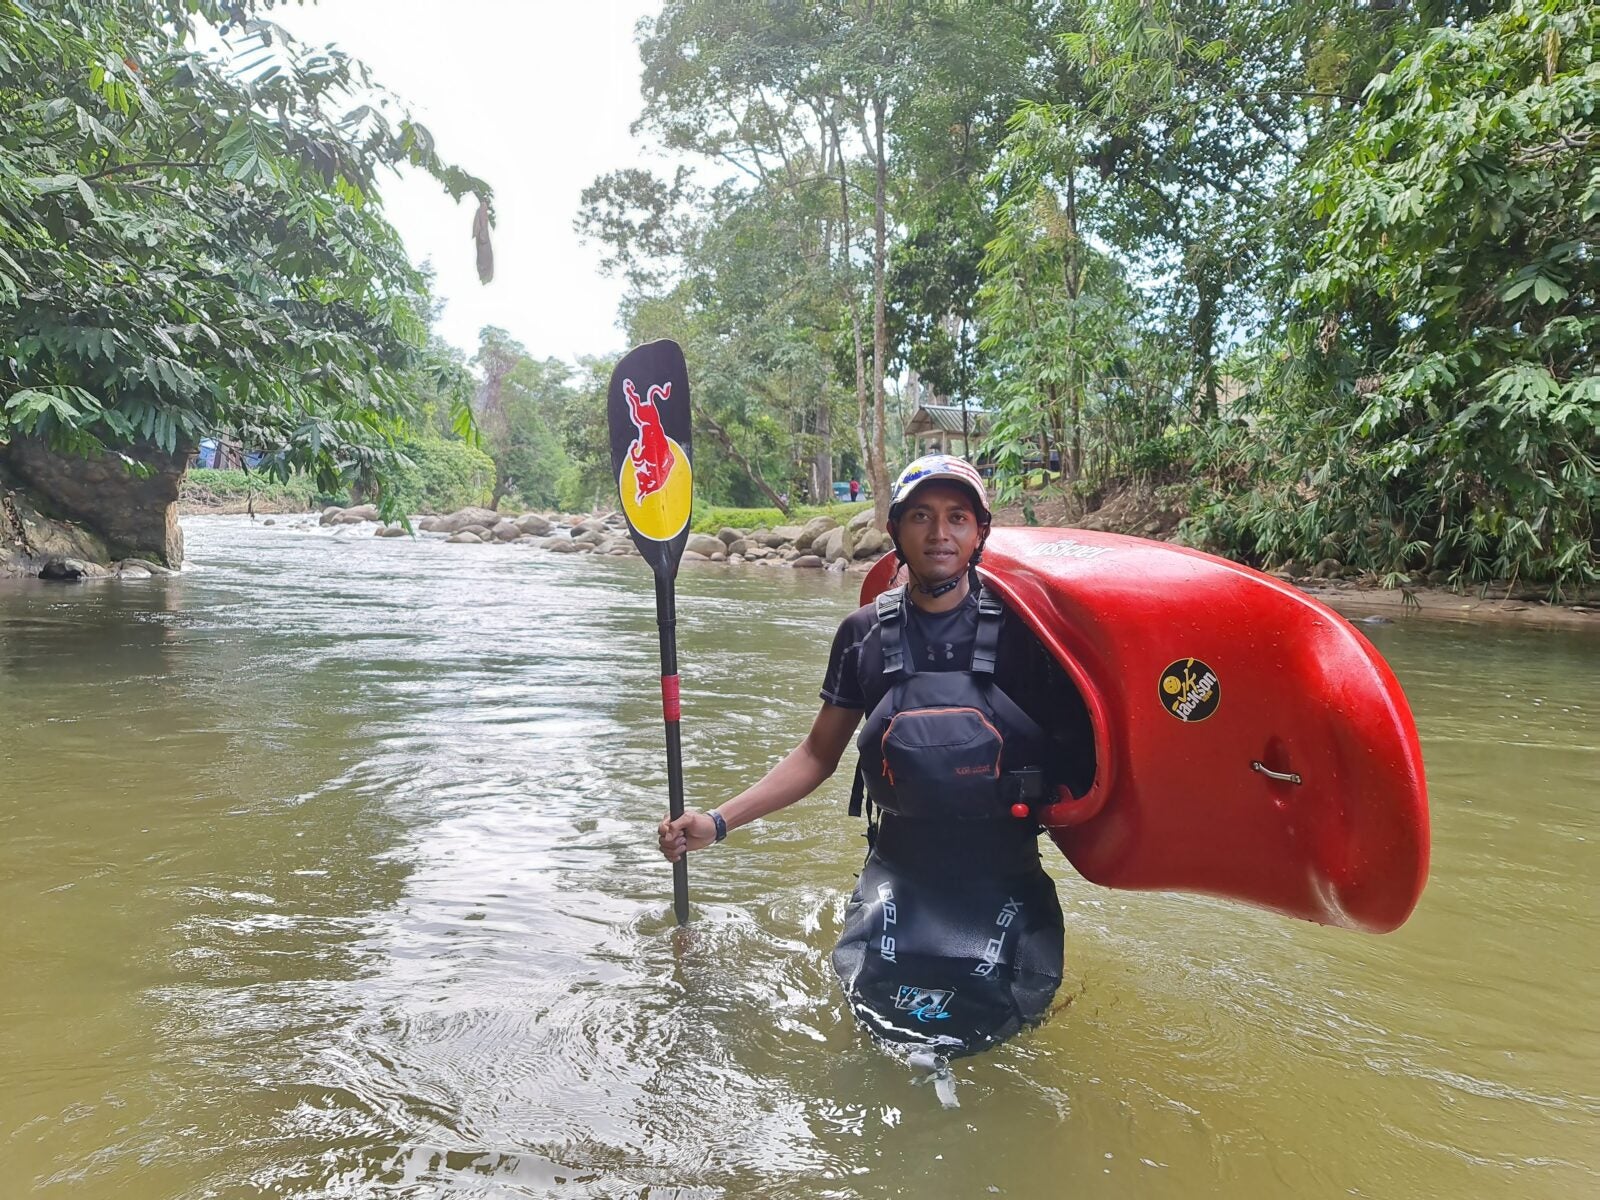 A Malay man stands and looks straight on while he is in a knee-deep river. He holds a red kayak over his shoulders and its paddle in his right hand.